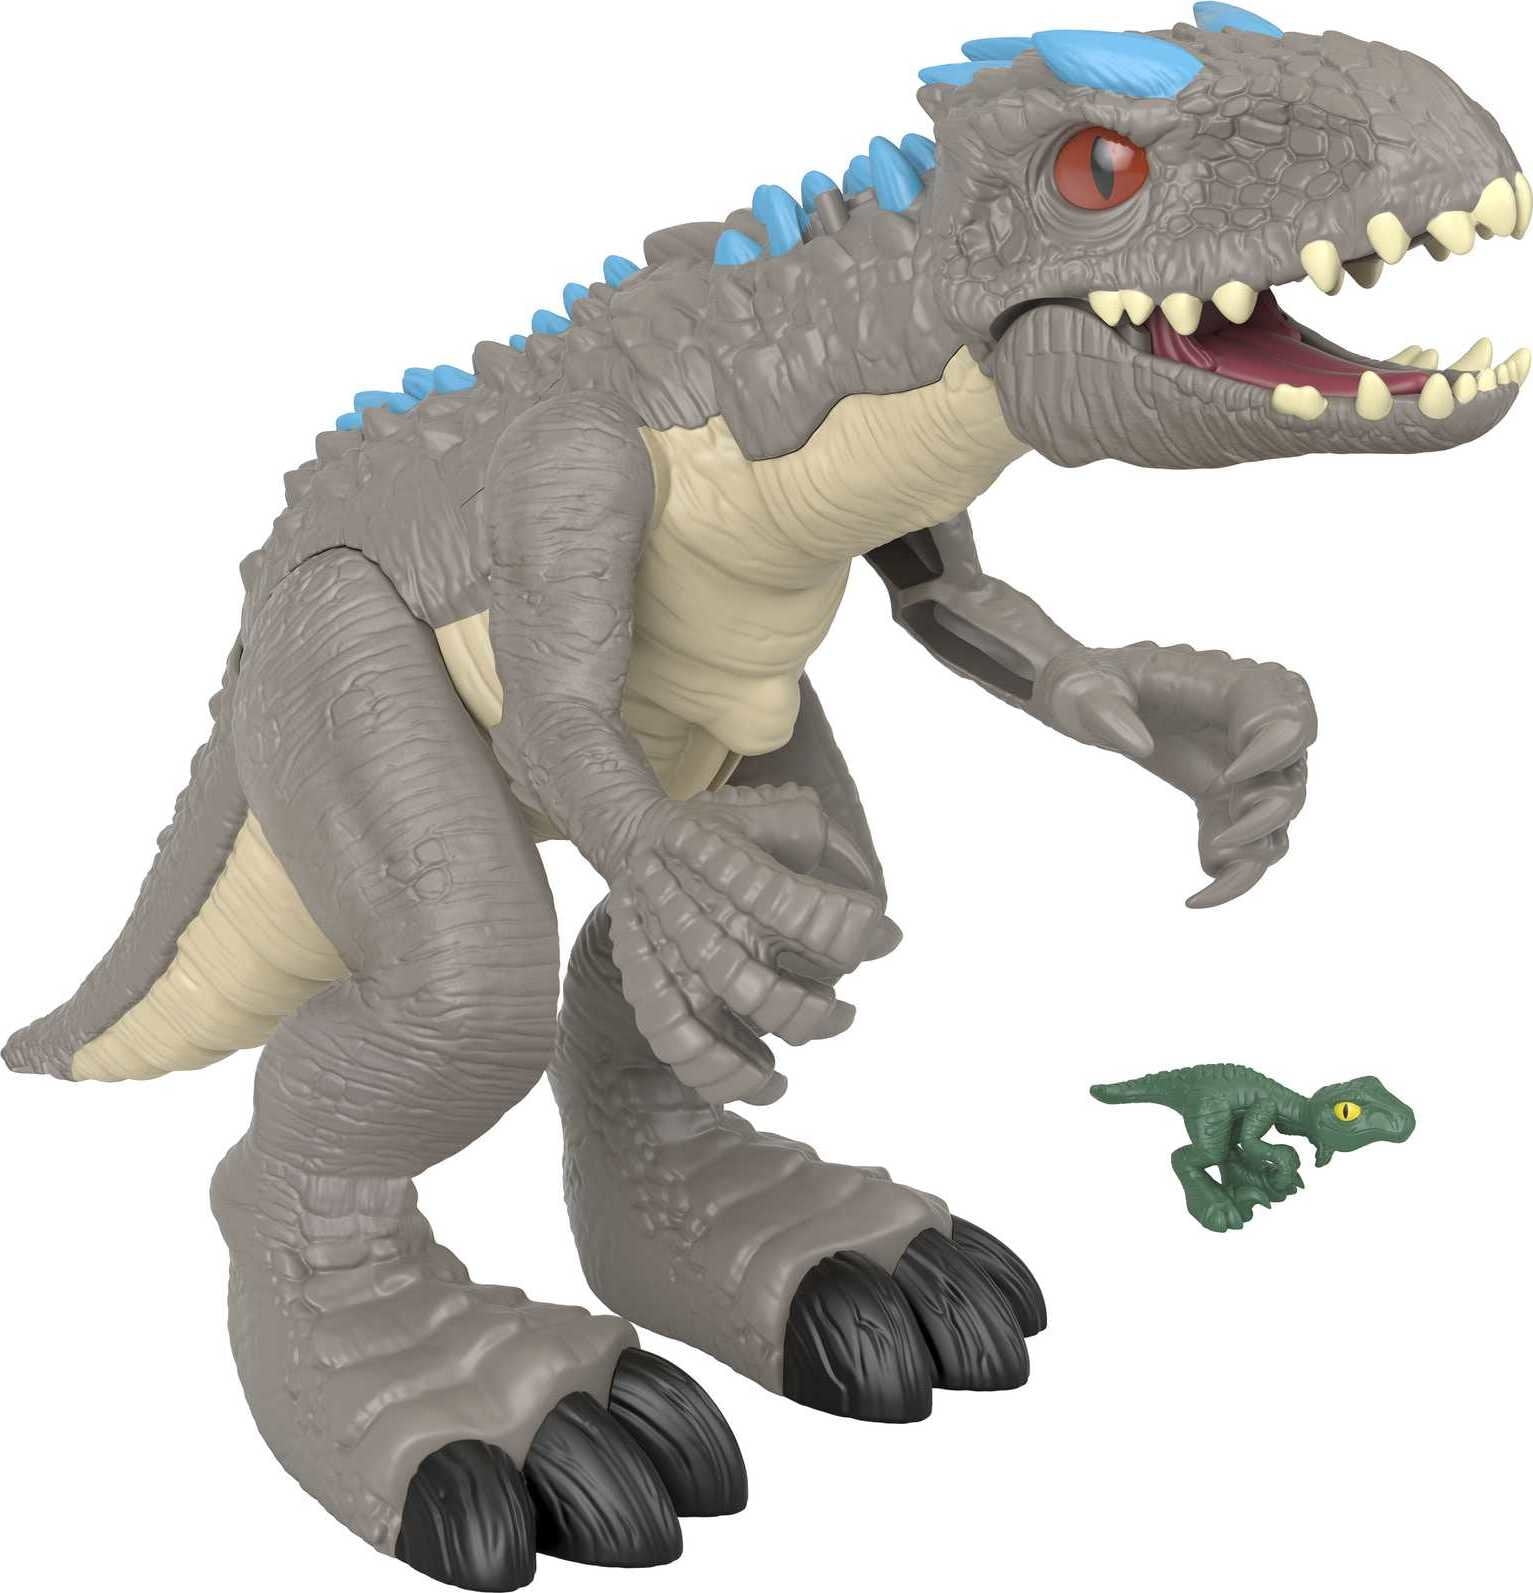 Jurassic' dino toys, including debut of Indominus Rex